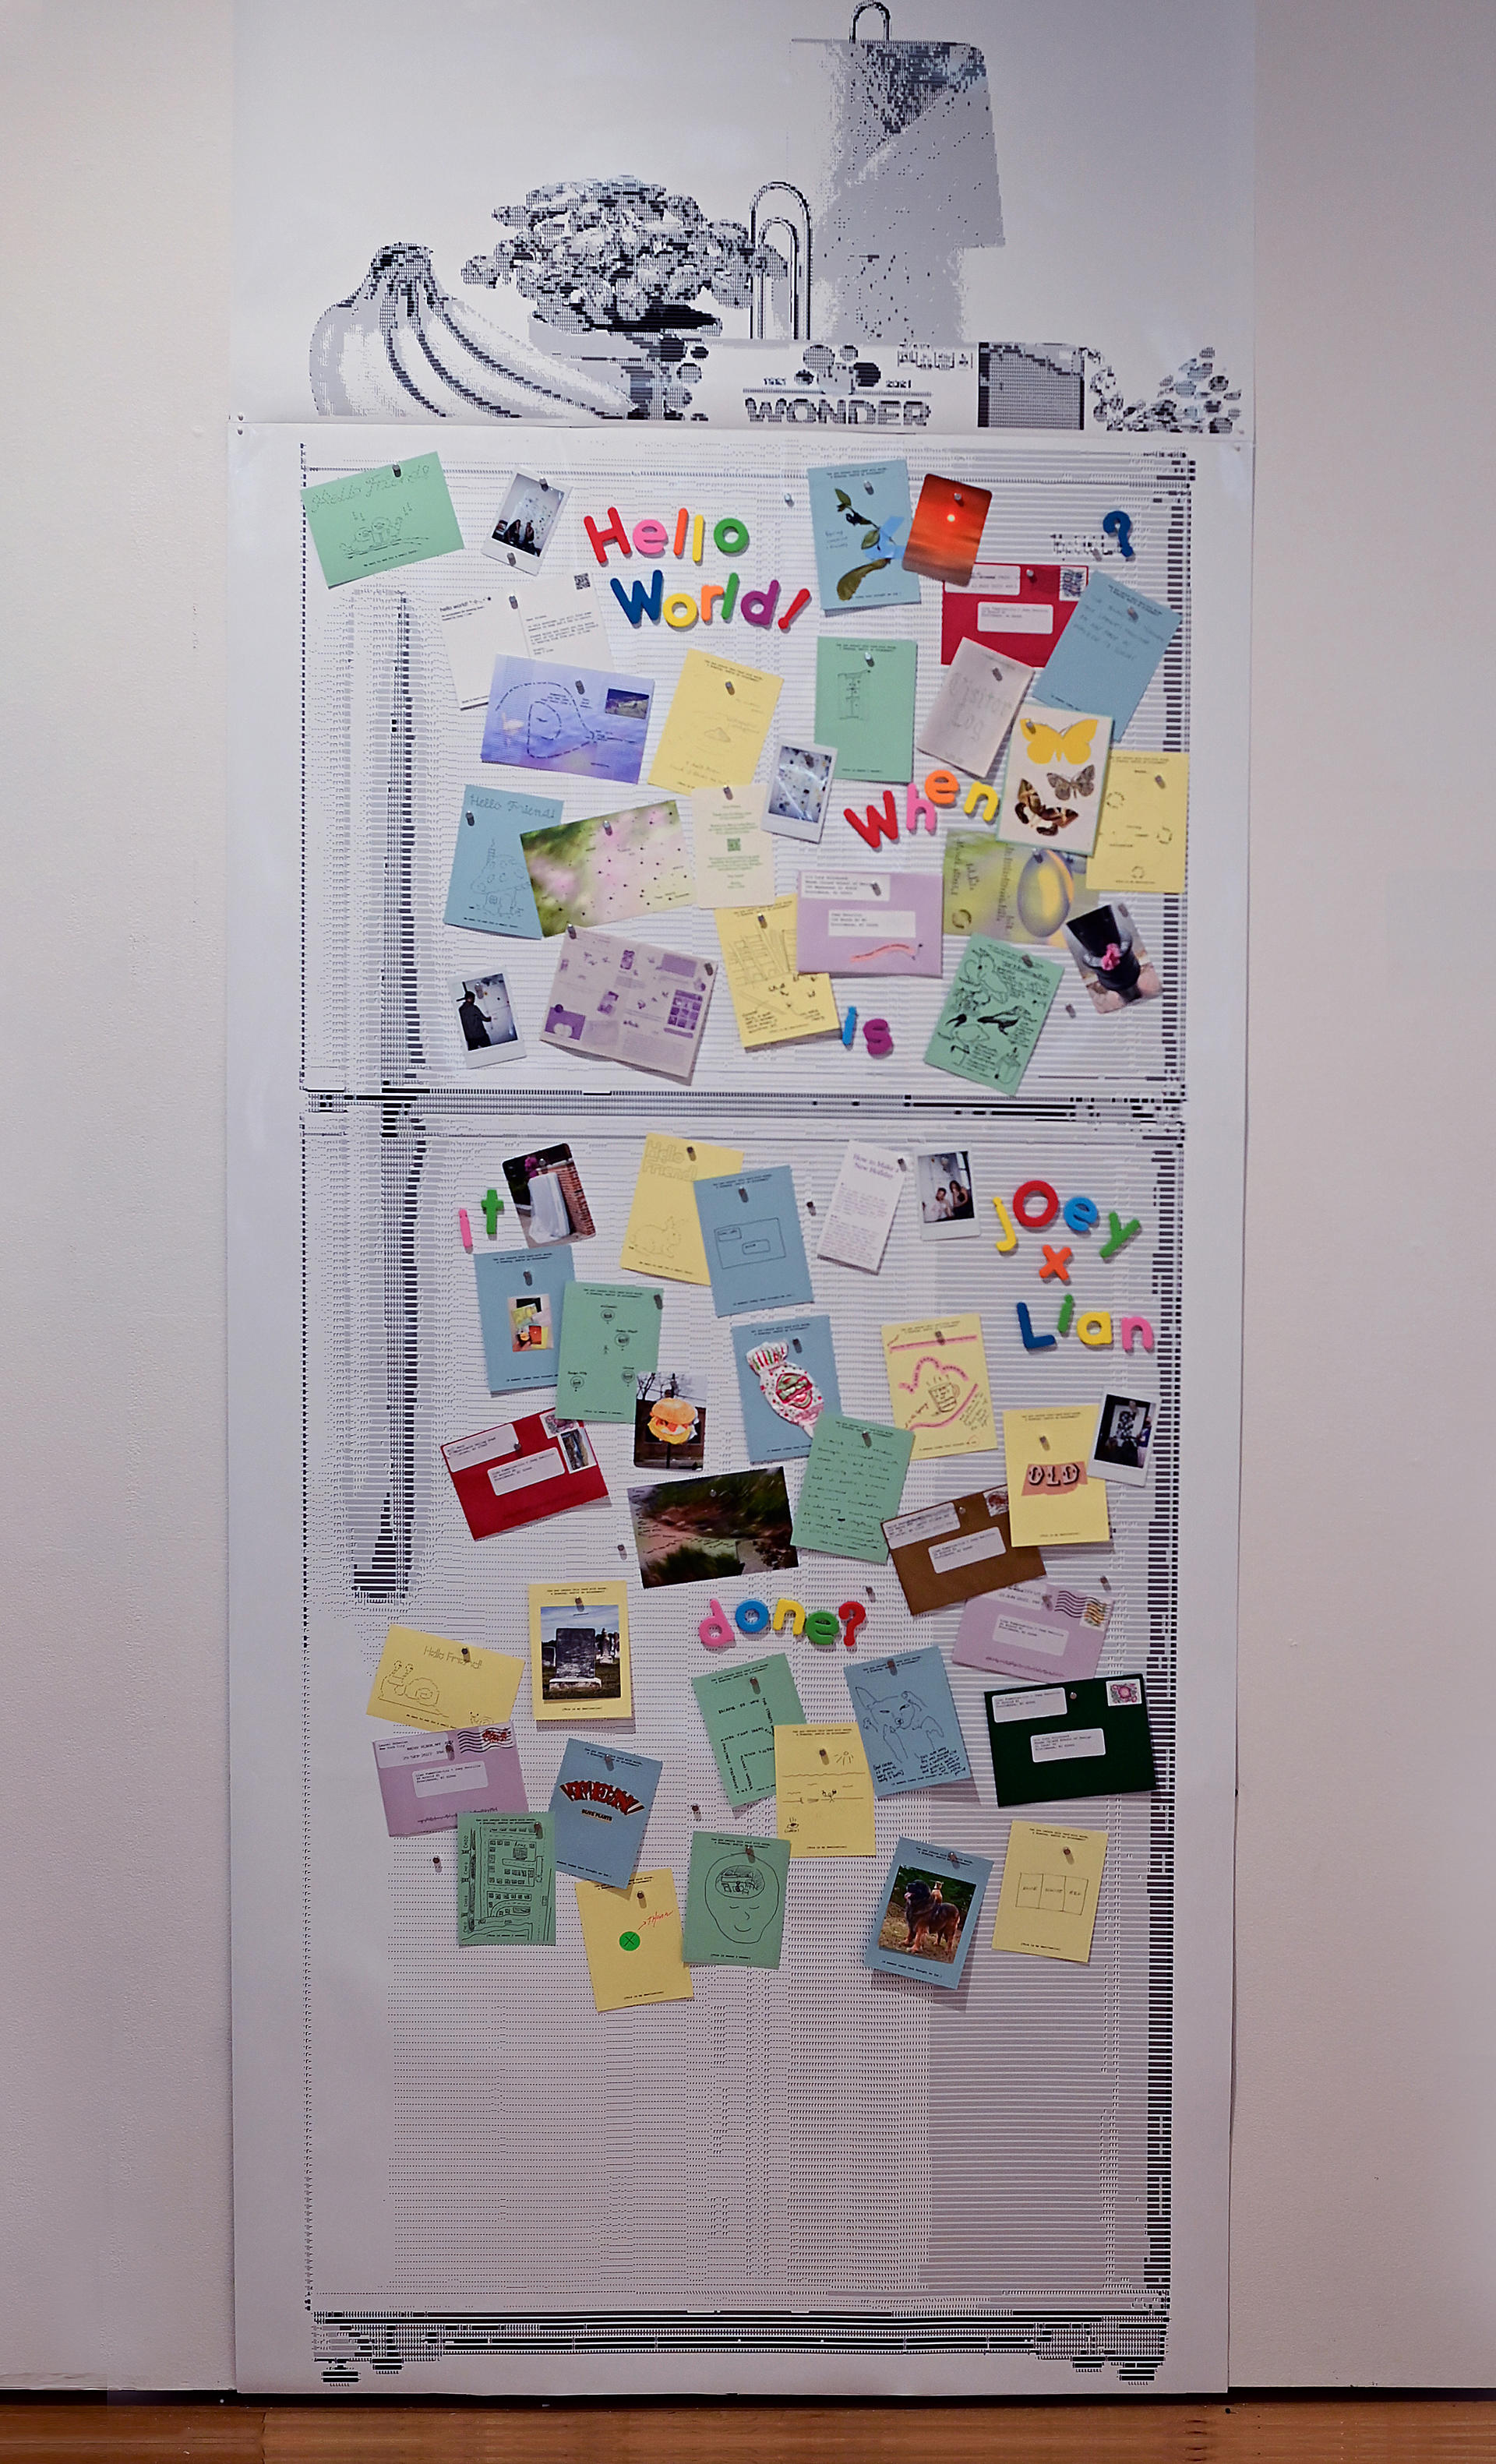 A print of a fridge made from ascii art covered in magnets and postcards with various doodles and notes